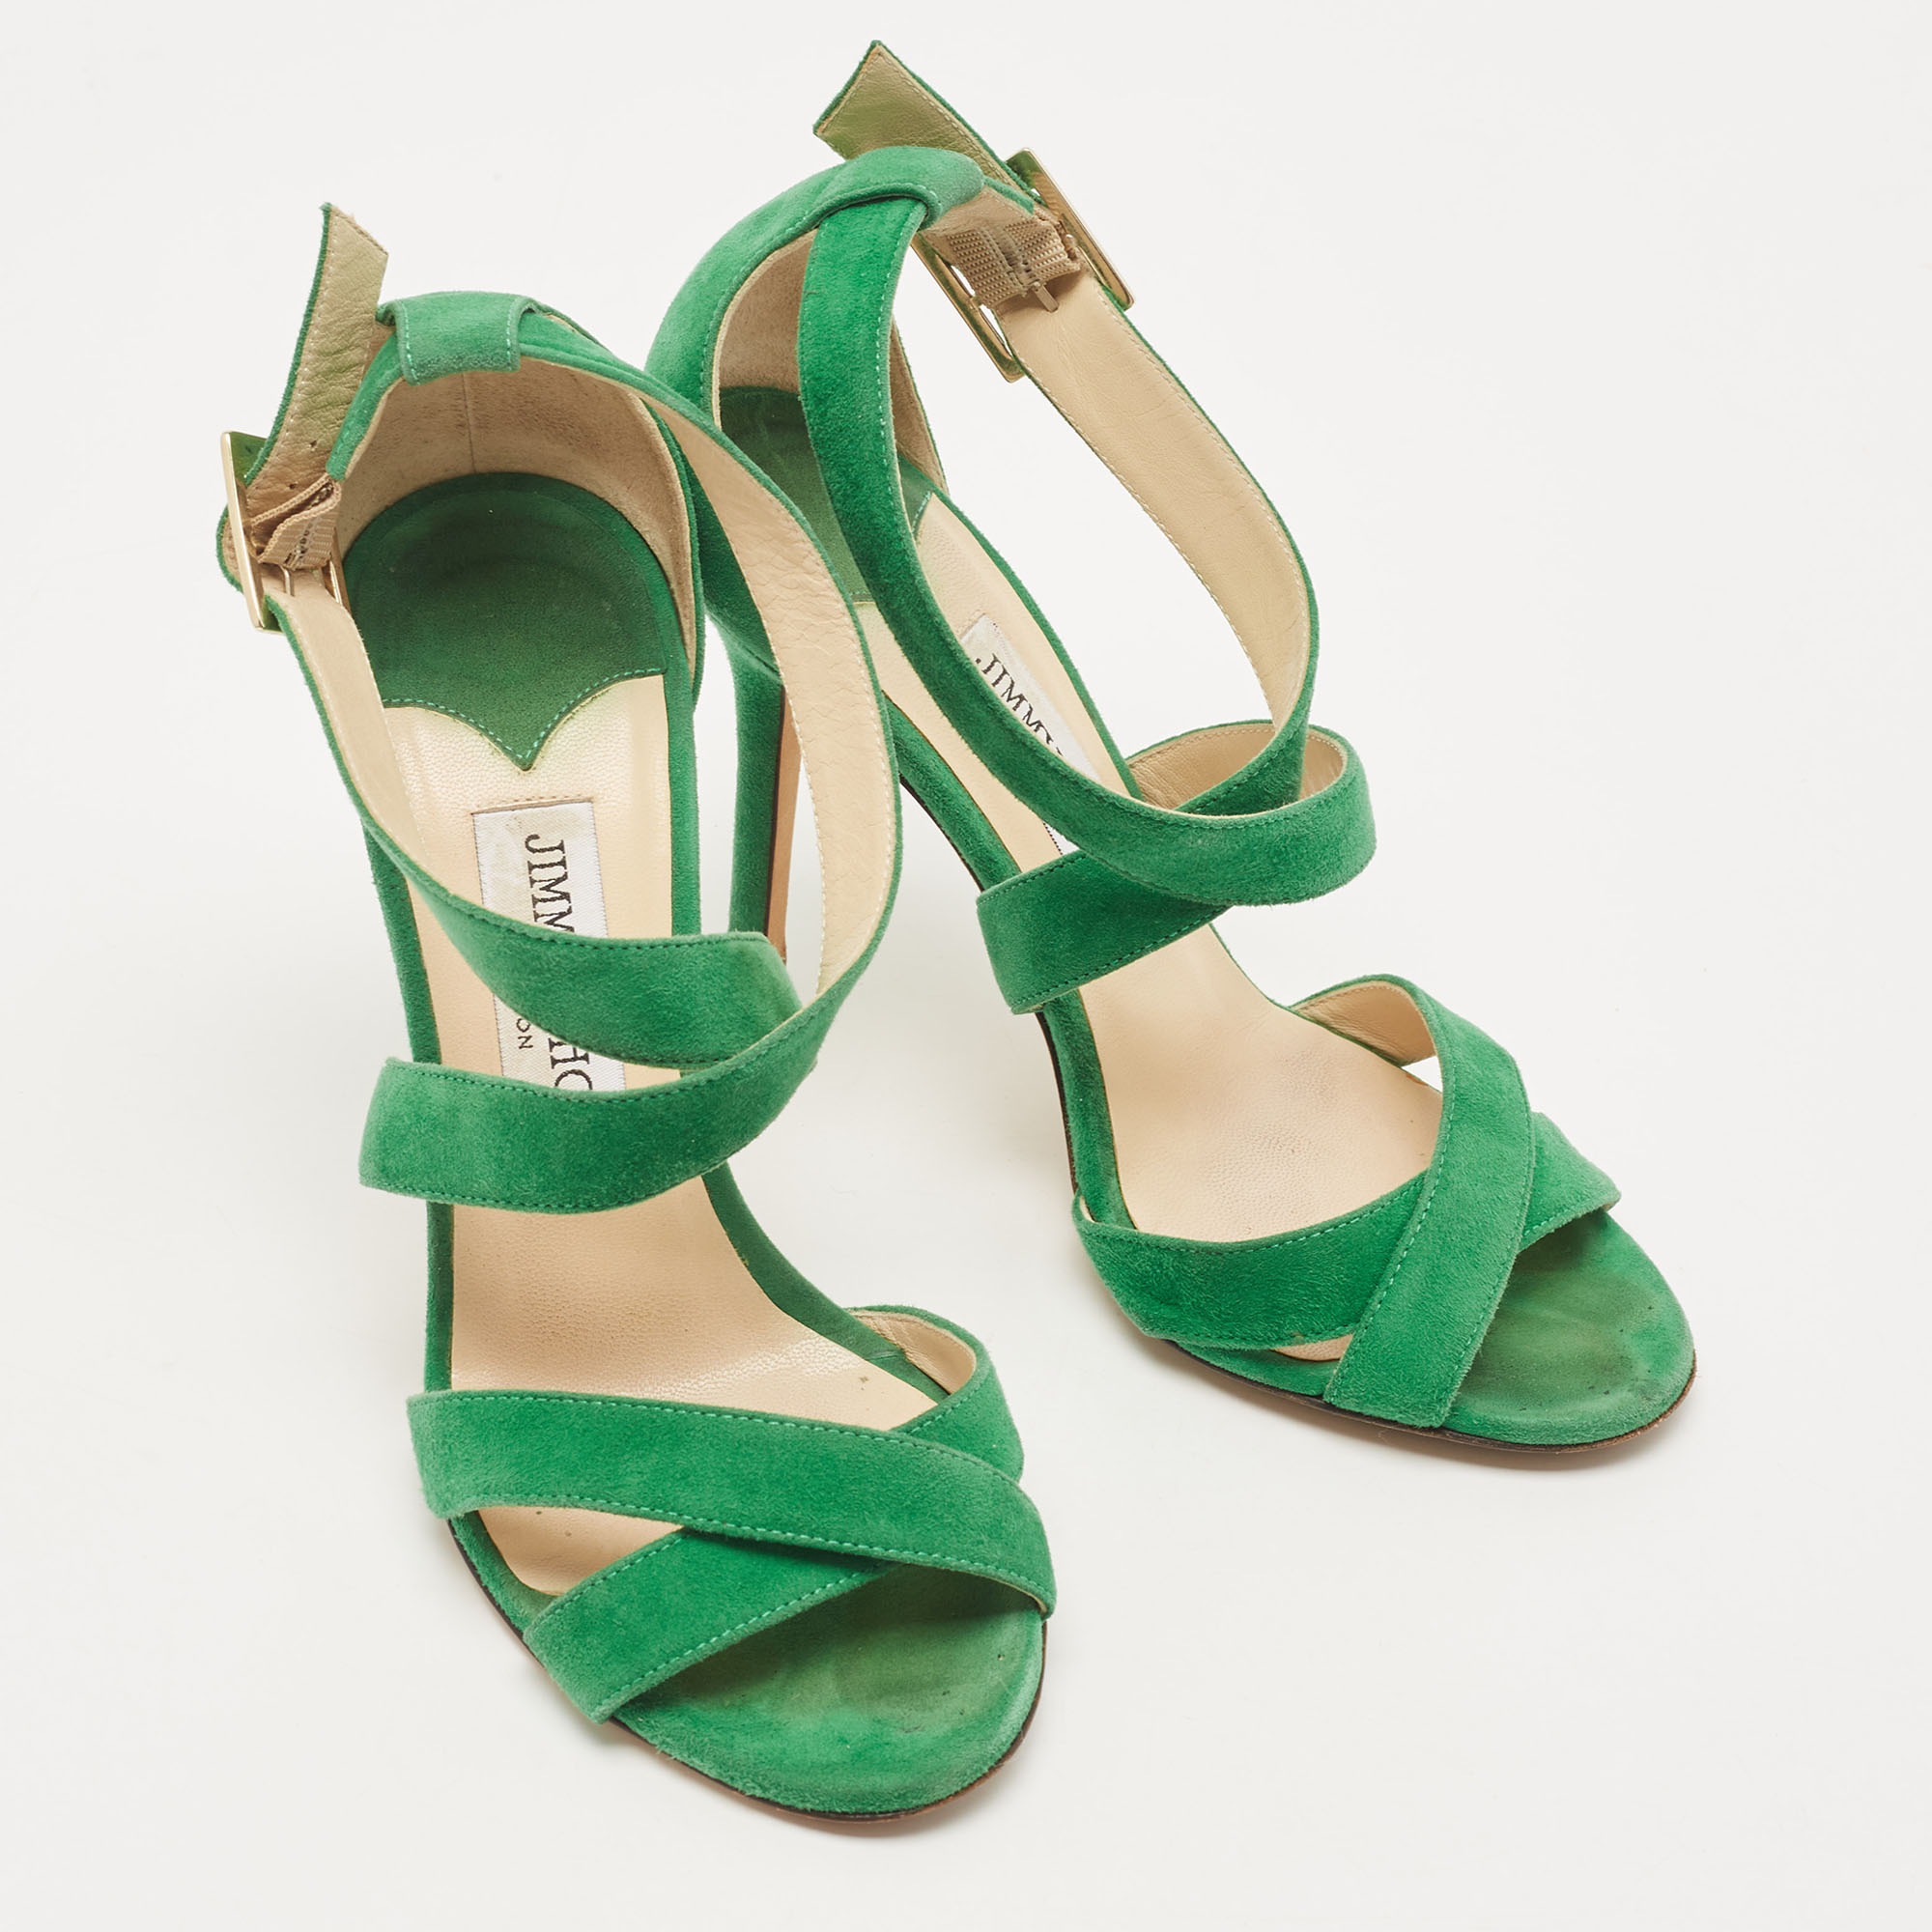 Jimmy Choo Green Suede Ankle Strap Sandals Size 36